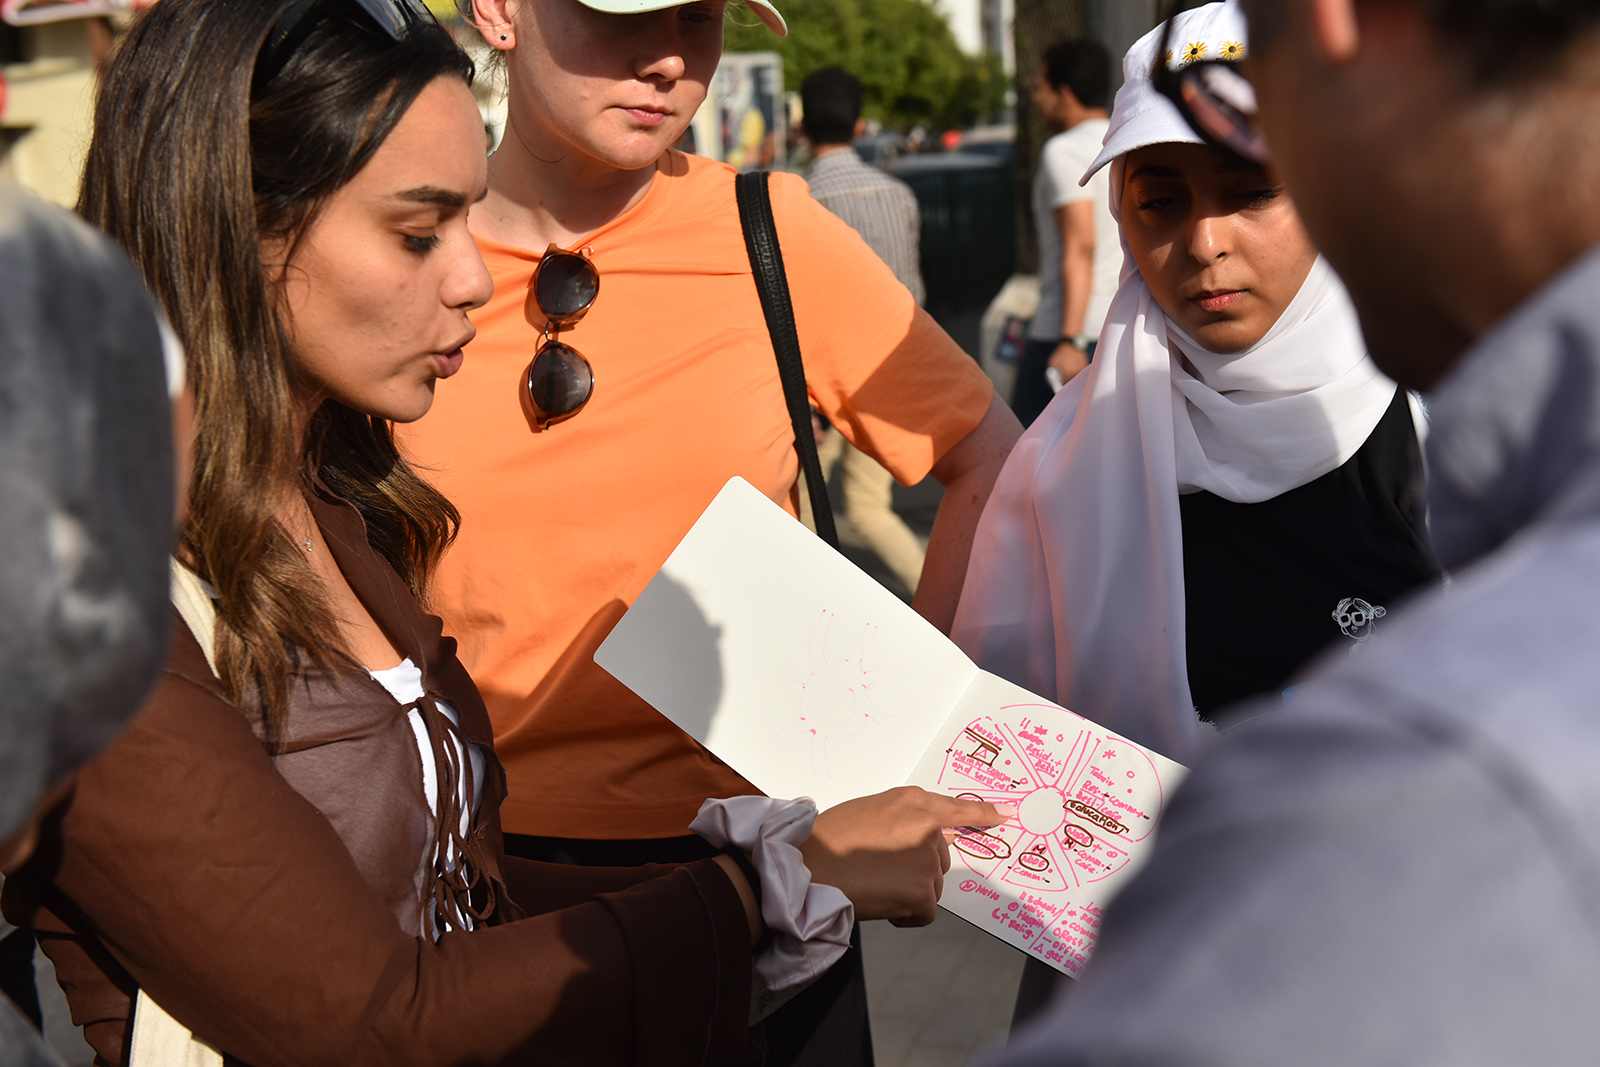 A girl holding a paper and pointing at it while explaining to a group of people